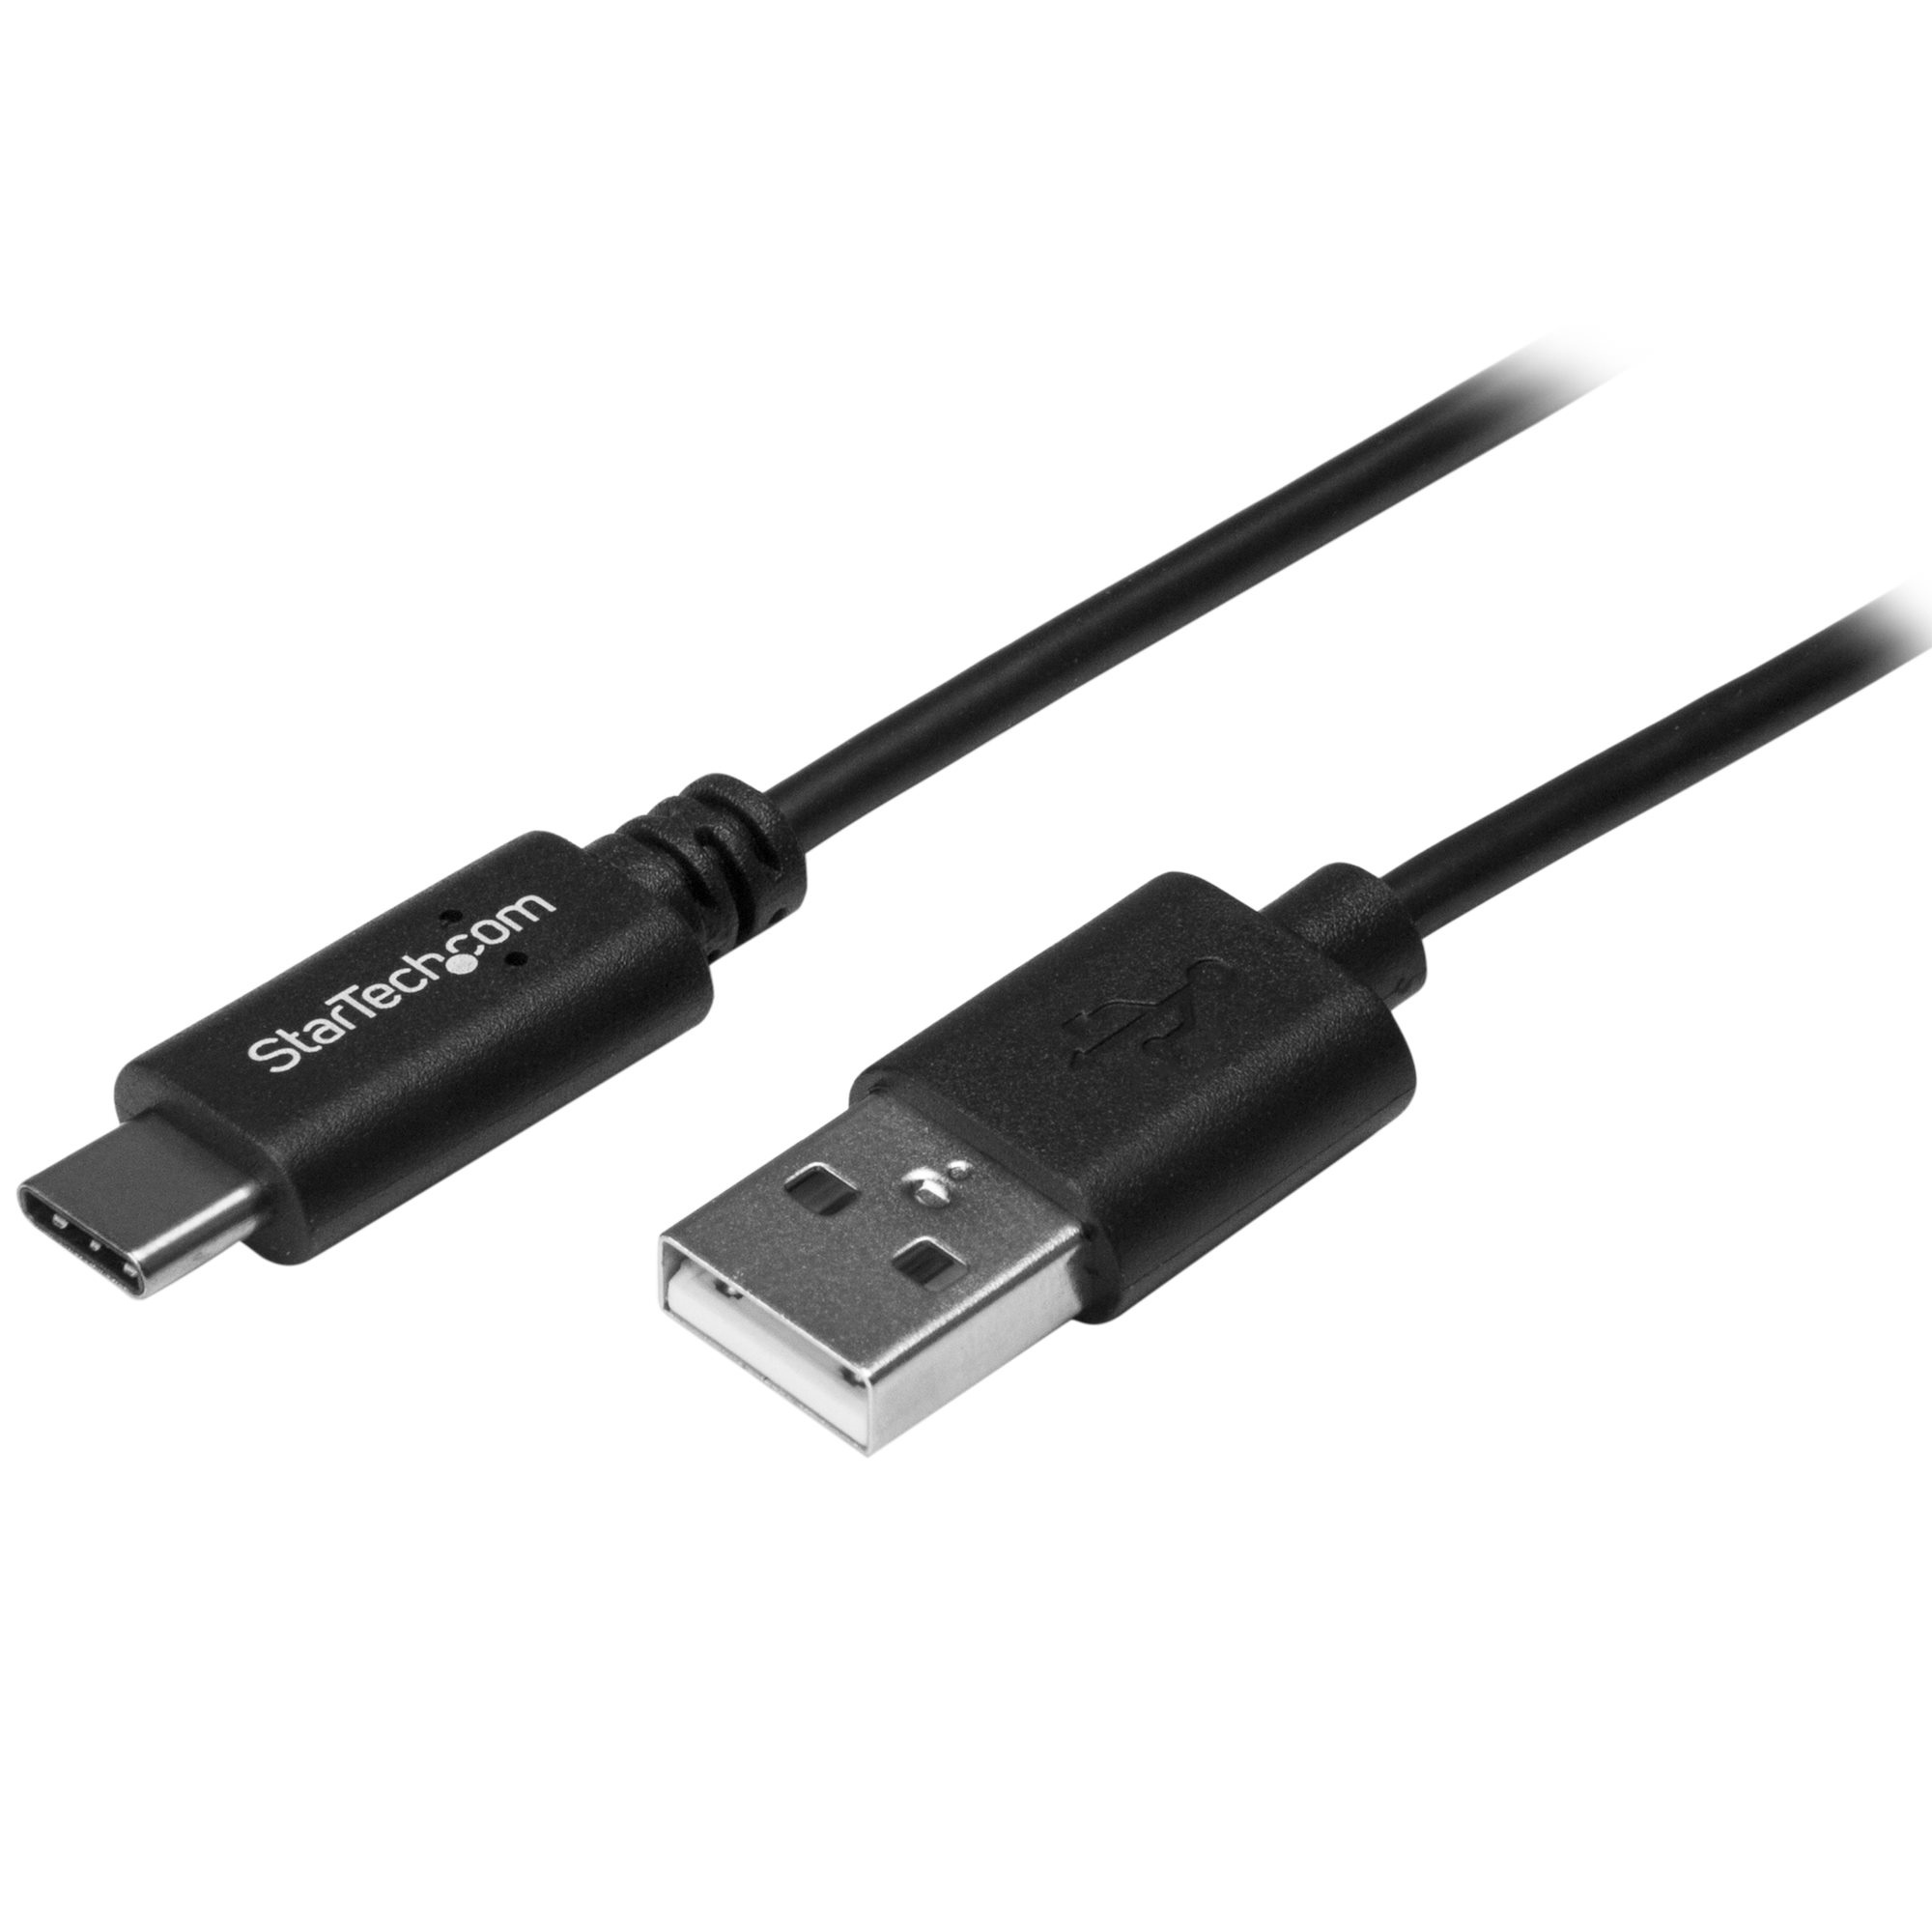 StarTech USB C to USB A Cable - M/M (2m)